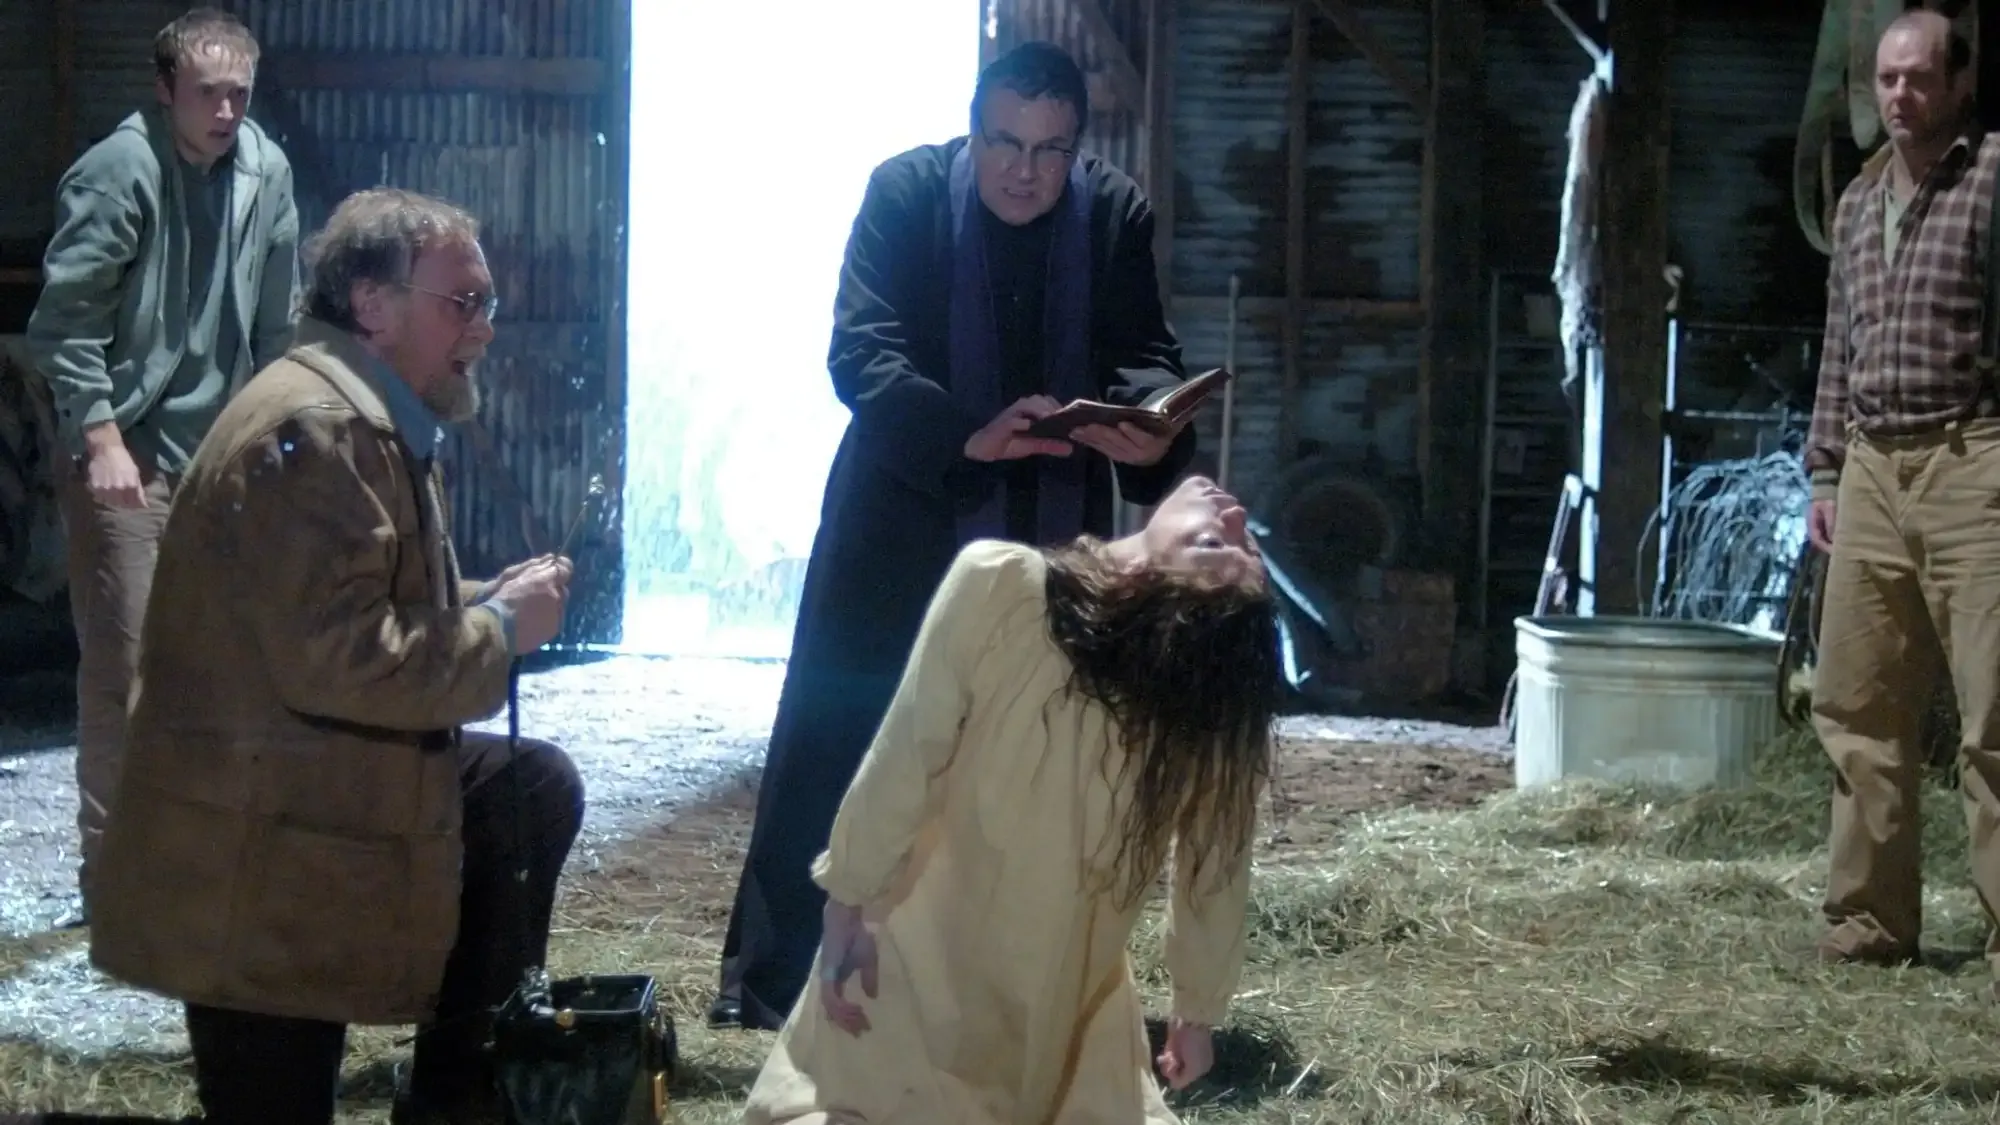 The Exorcism of Emily Rose movie review